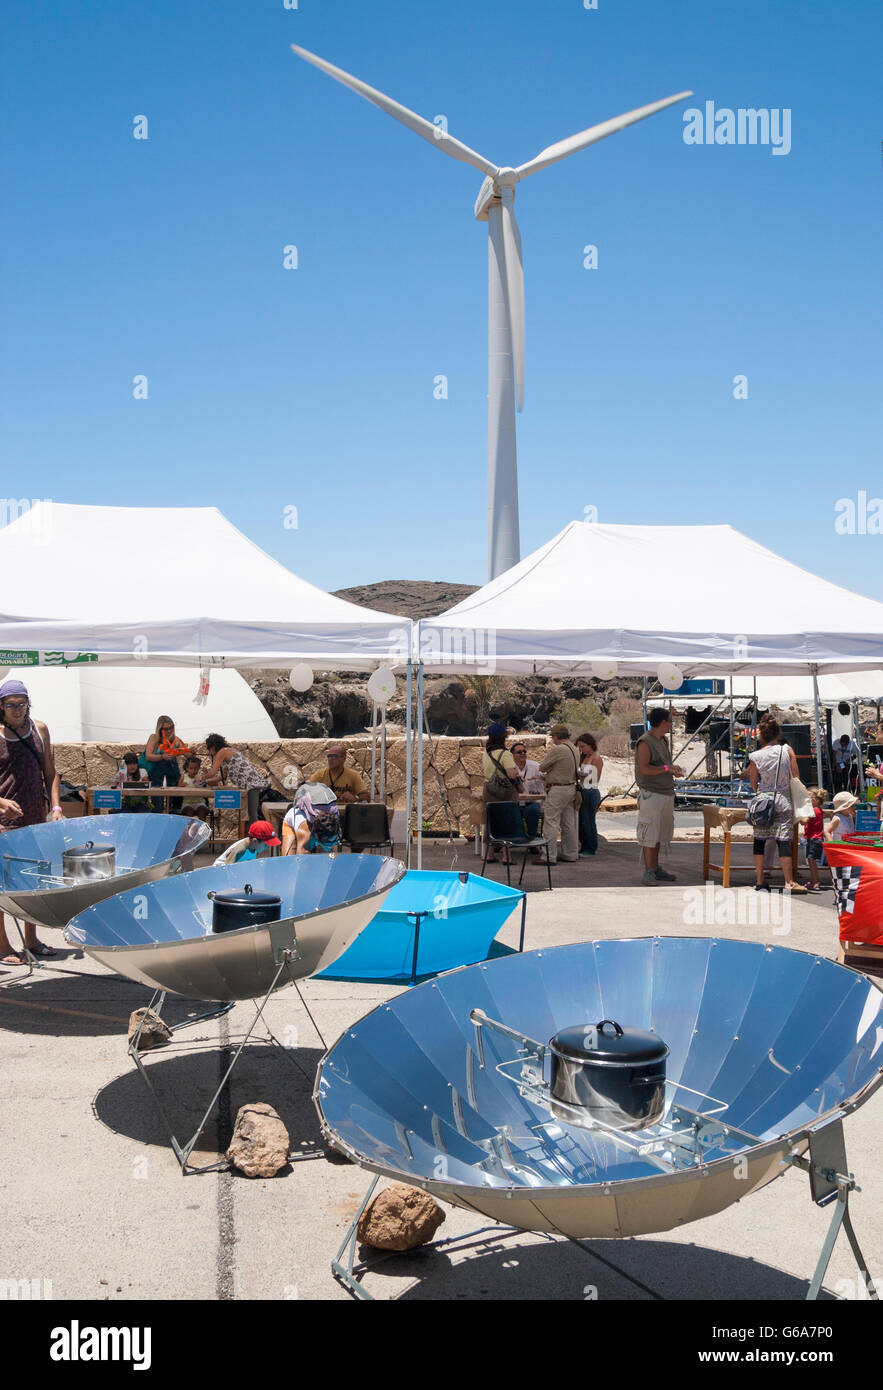 Cooking with a parabolic solar reflector at the Eolica festival of renewable energy on Tenerife. Stock Photo